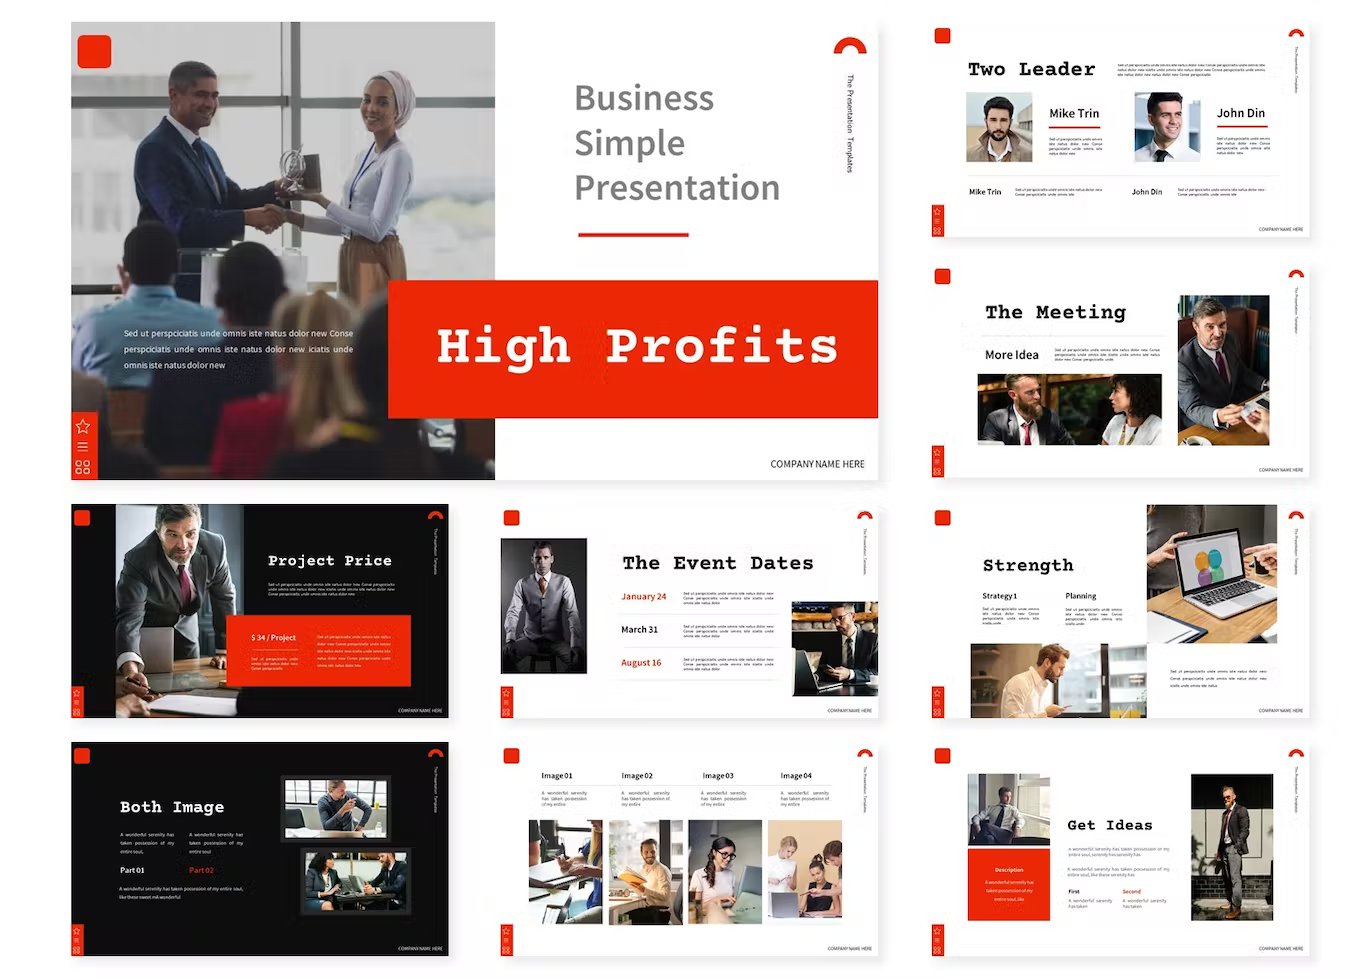 A set of 9 different high profits keynote templates in black, white and red on a white background.